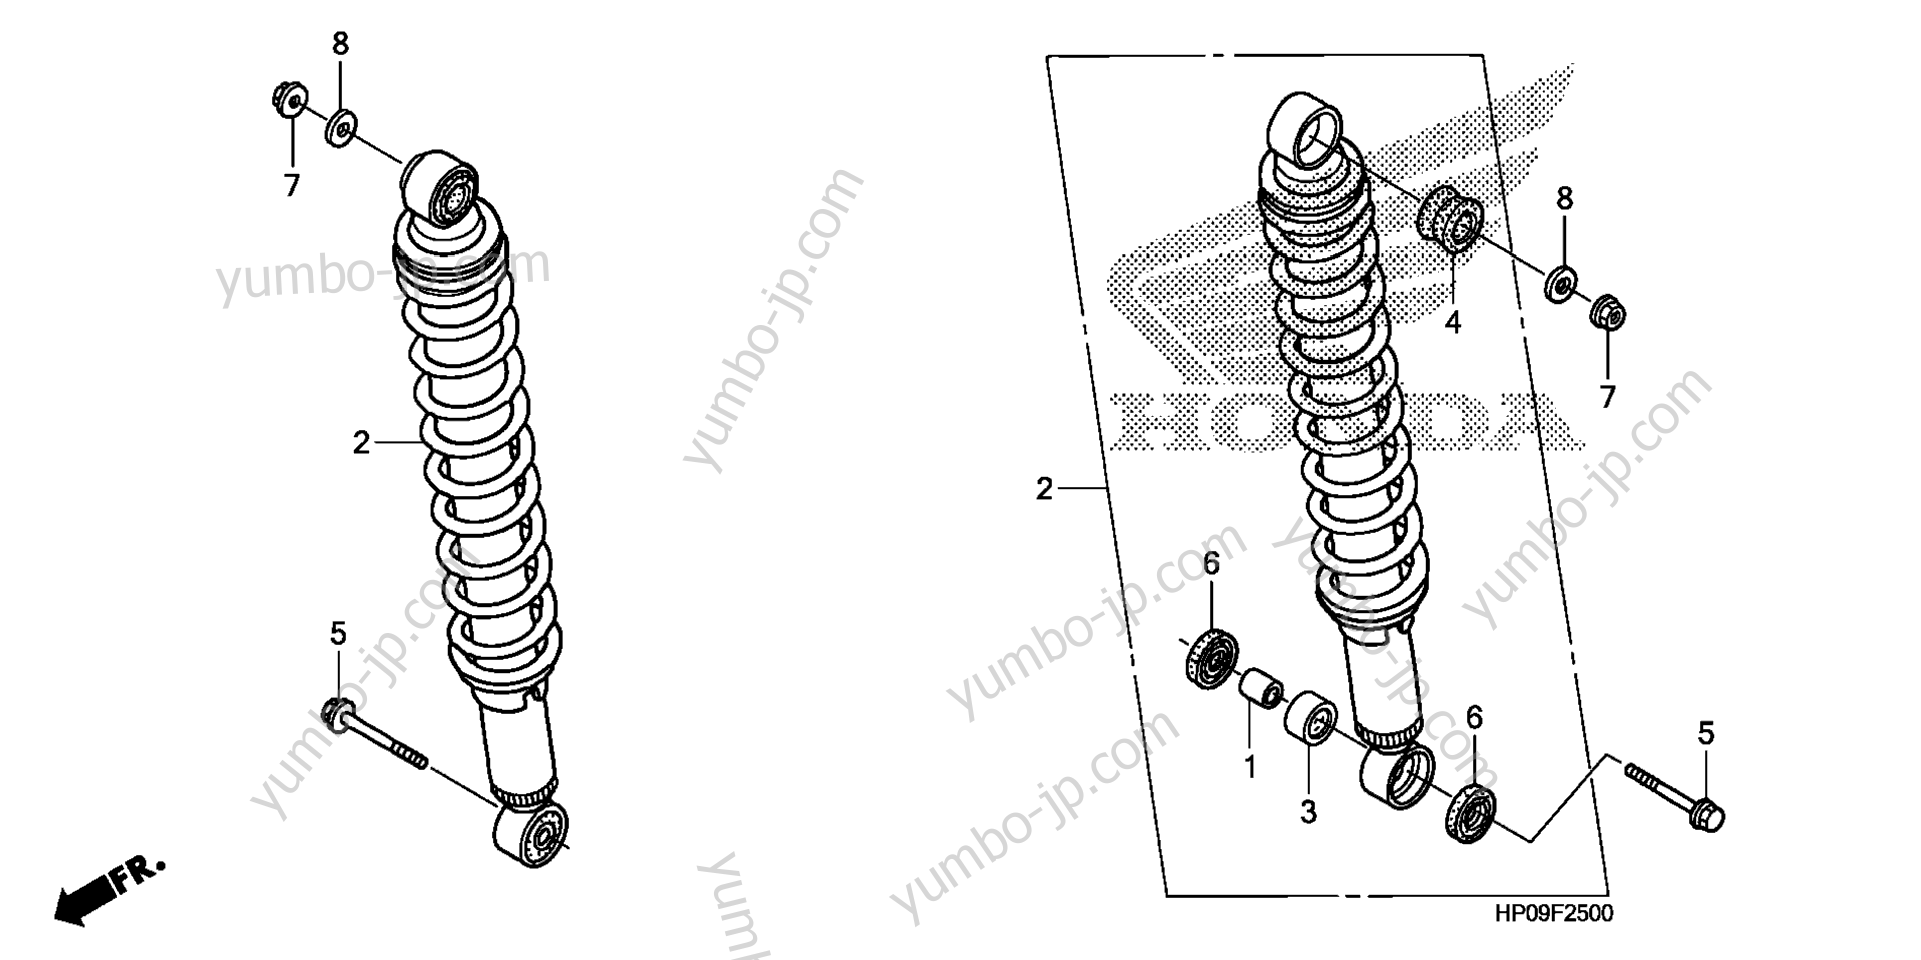 REAR SHOCK ABSORBER for ATVs HONDA TRX500FPE A 2009 year